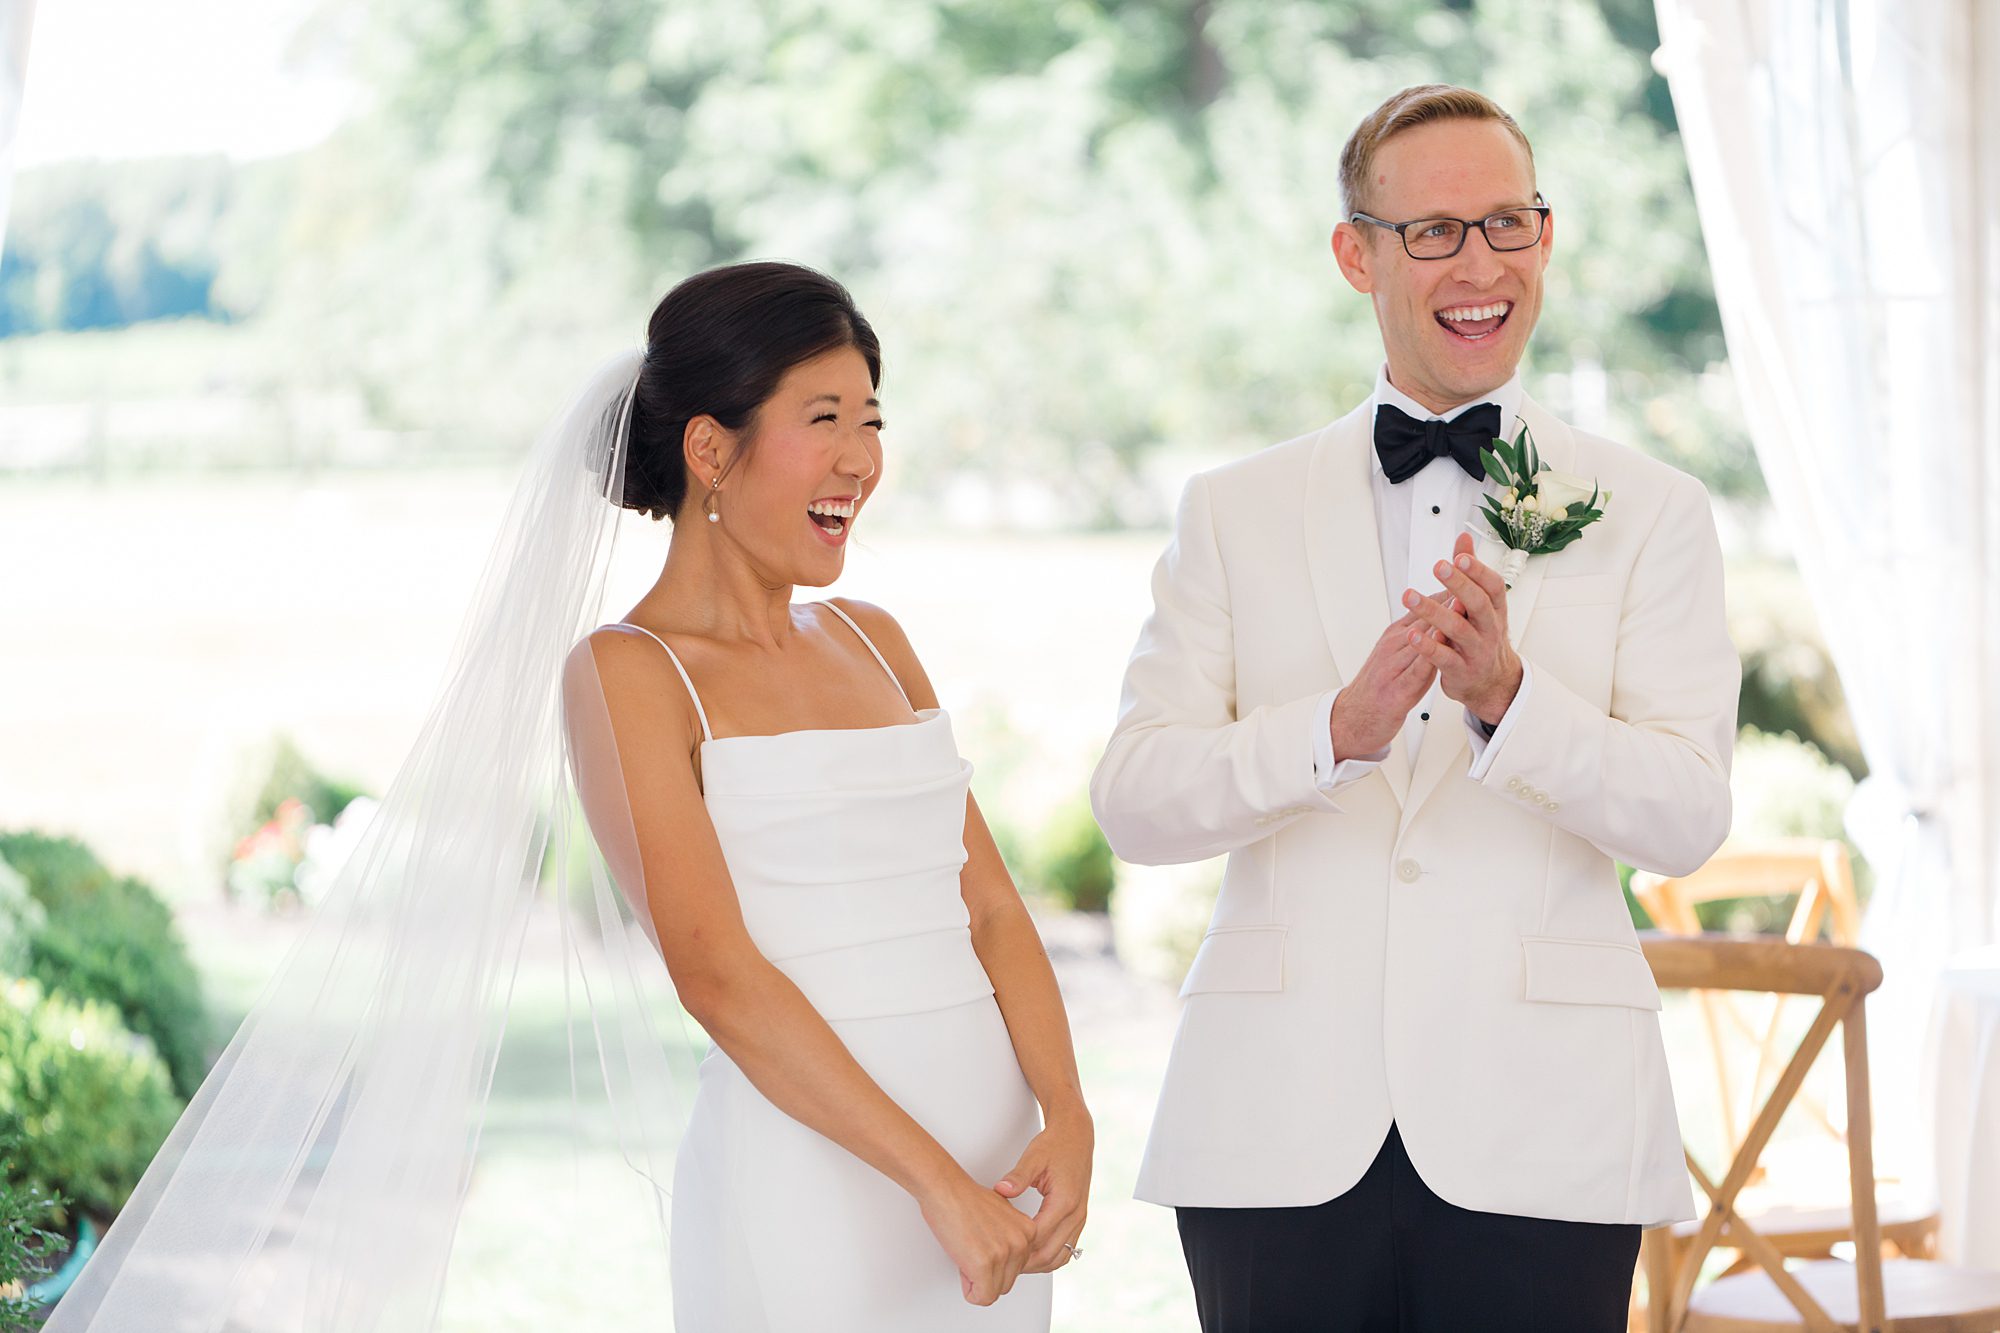 couple share a laugh together at wedding reception